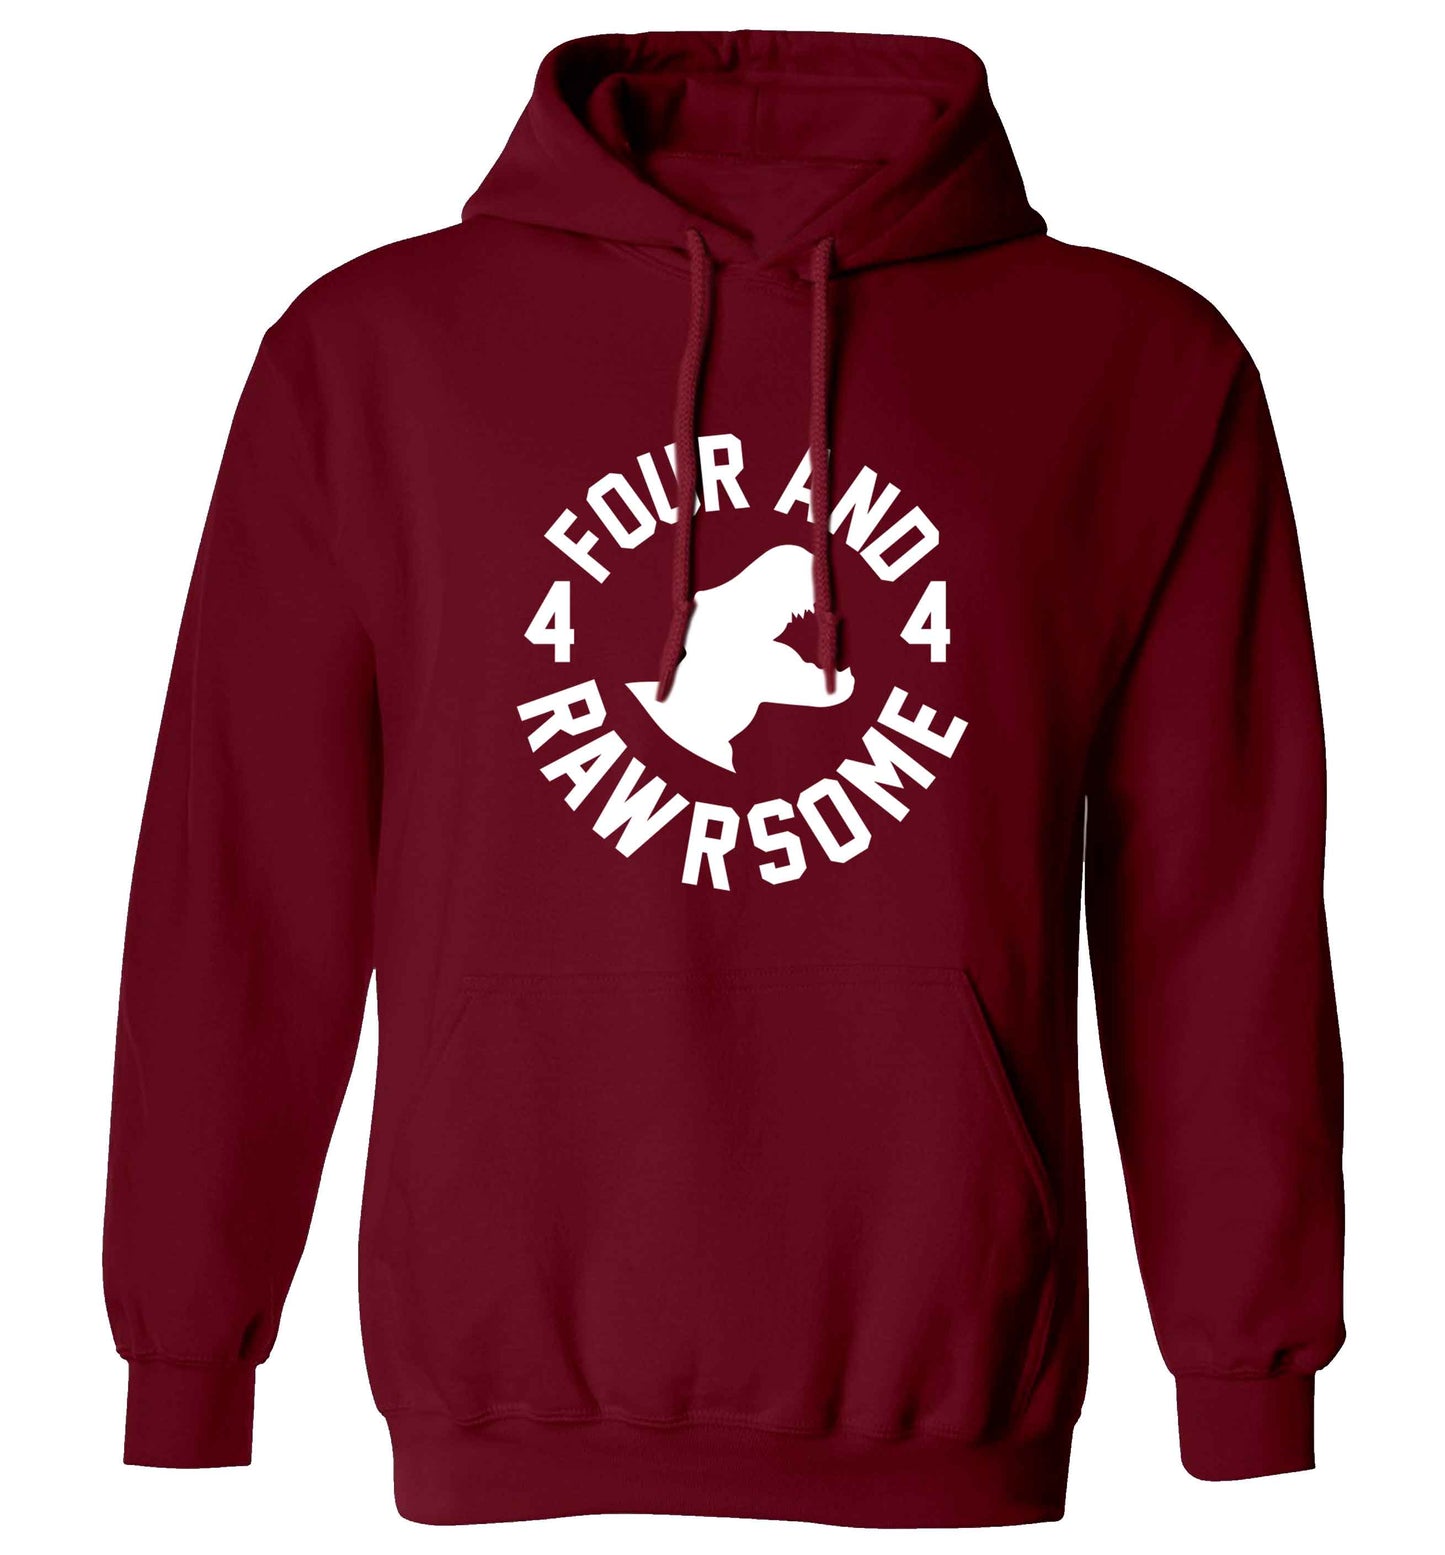 Four and rawrsome adults unisex maroon hoodie 2XL